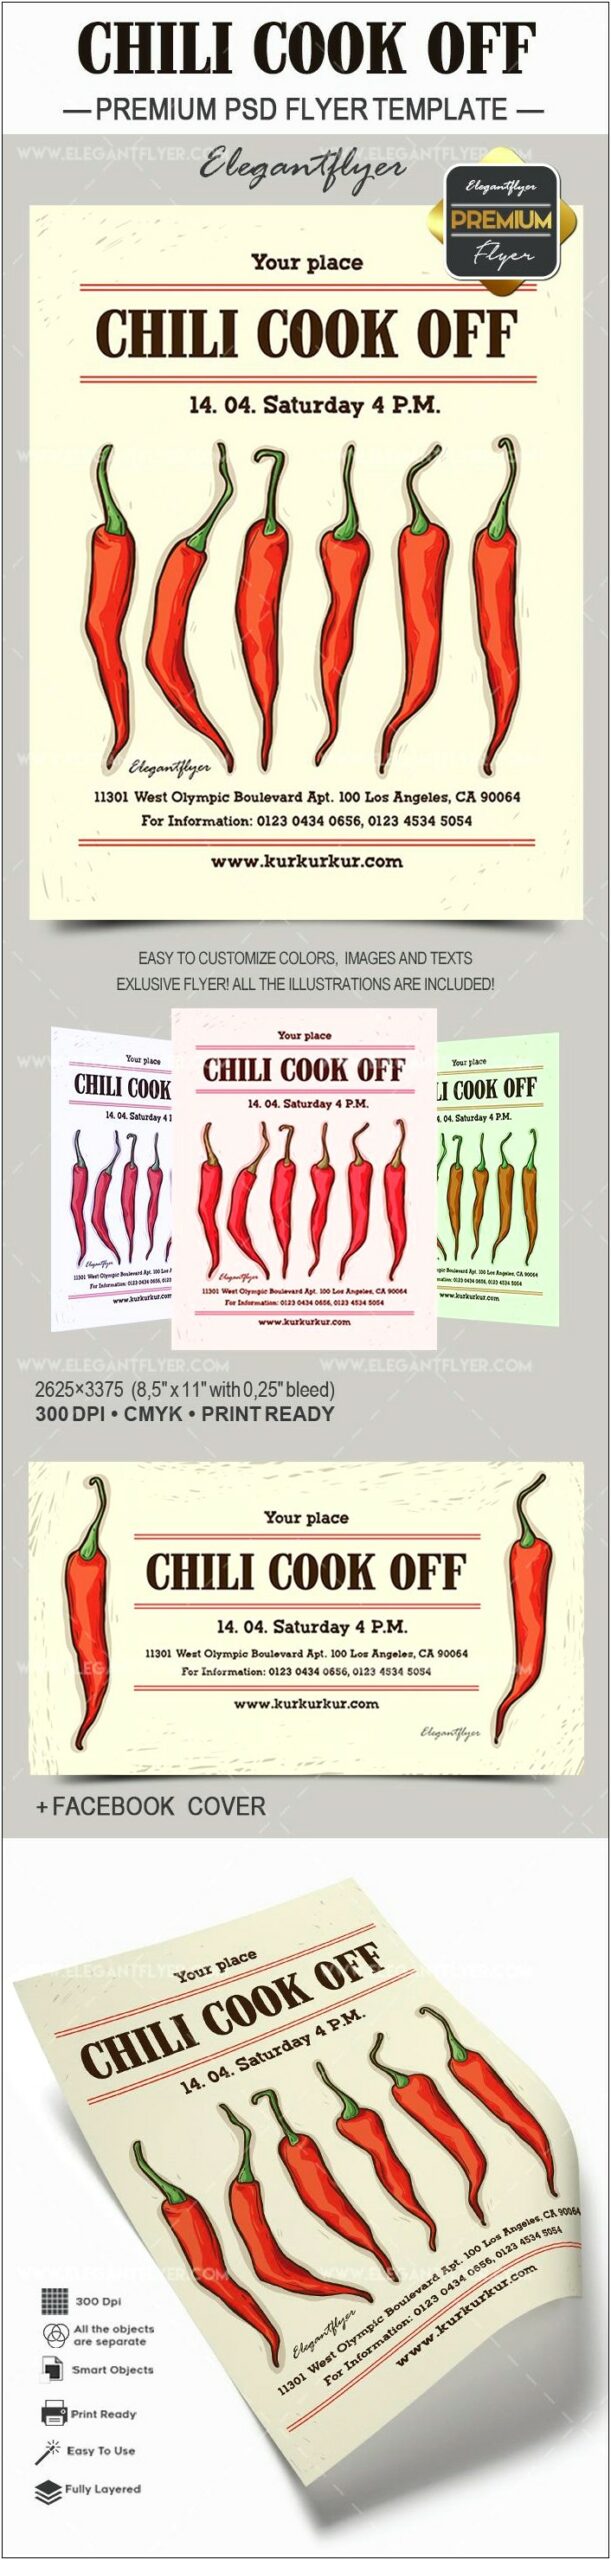 Free Chili Cook Off Flyer Template Photoshop